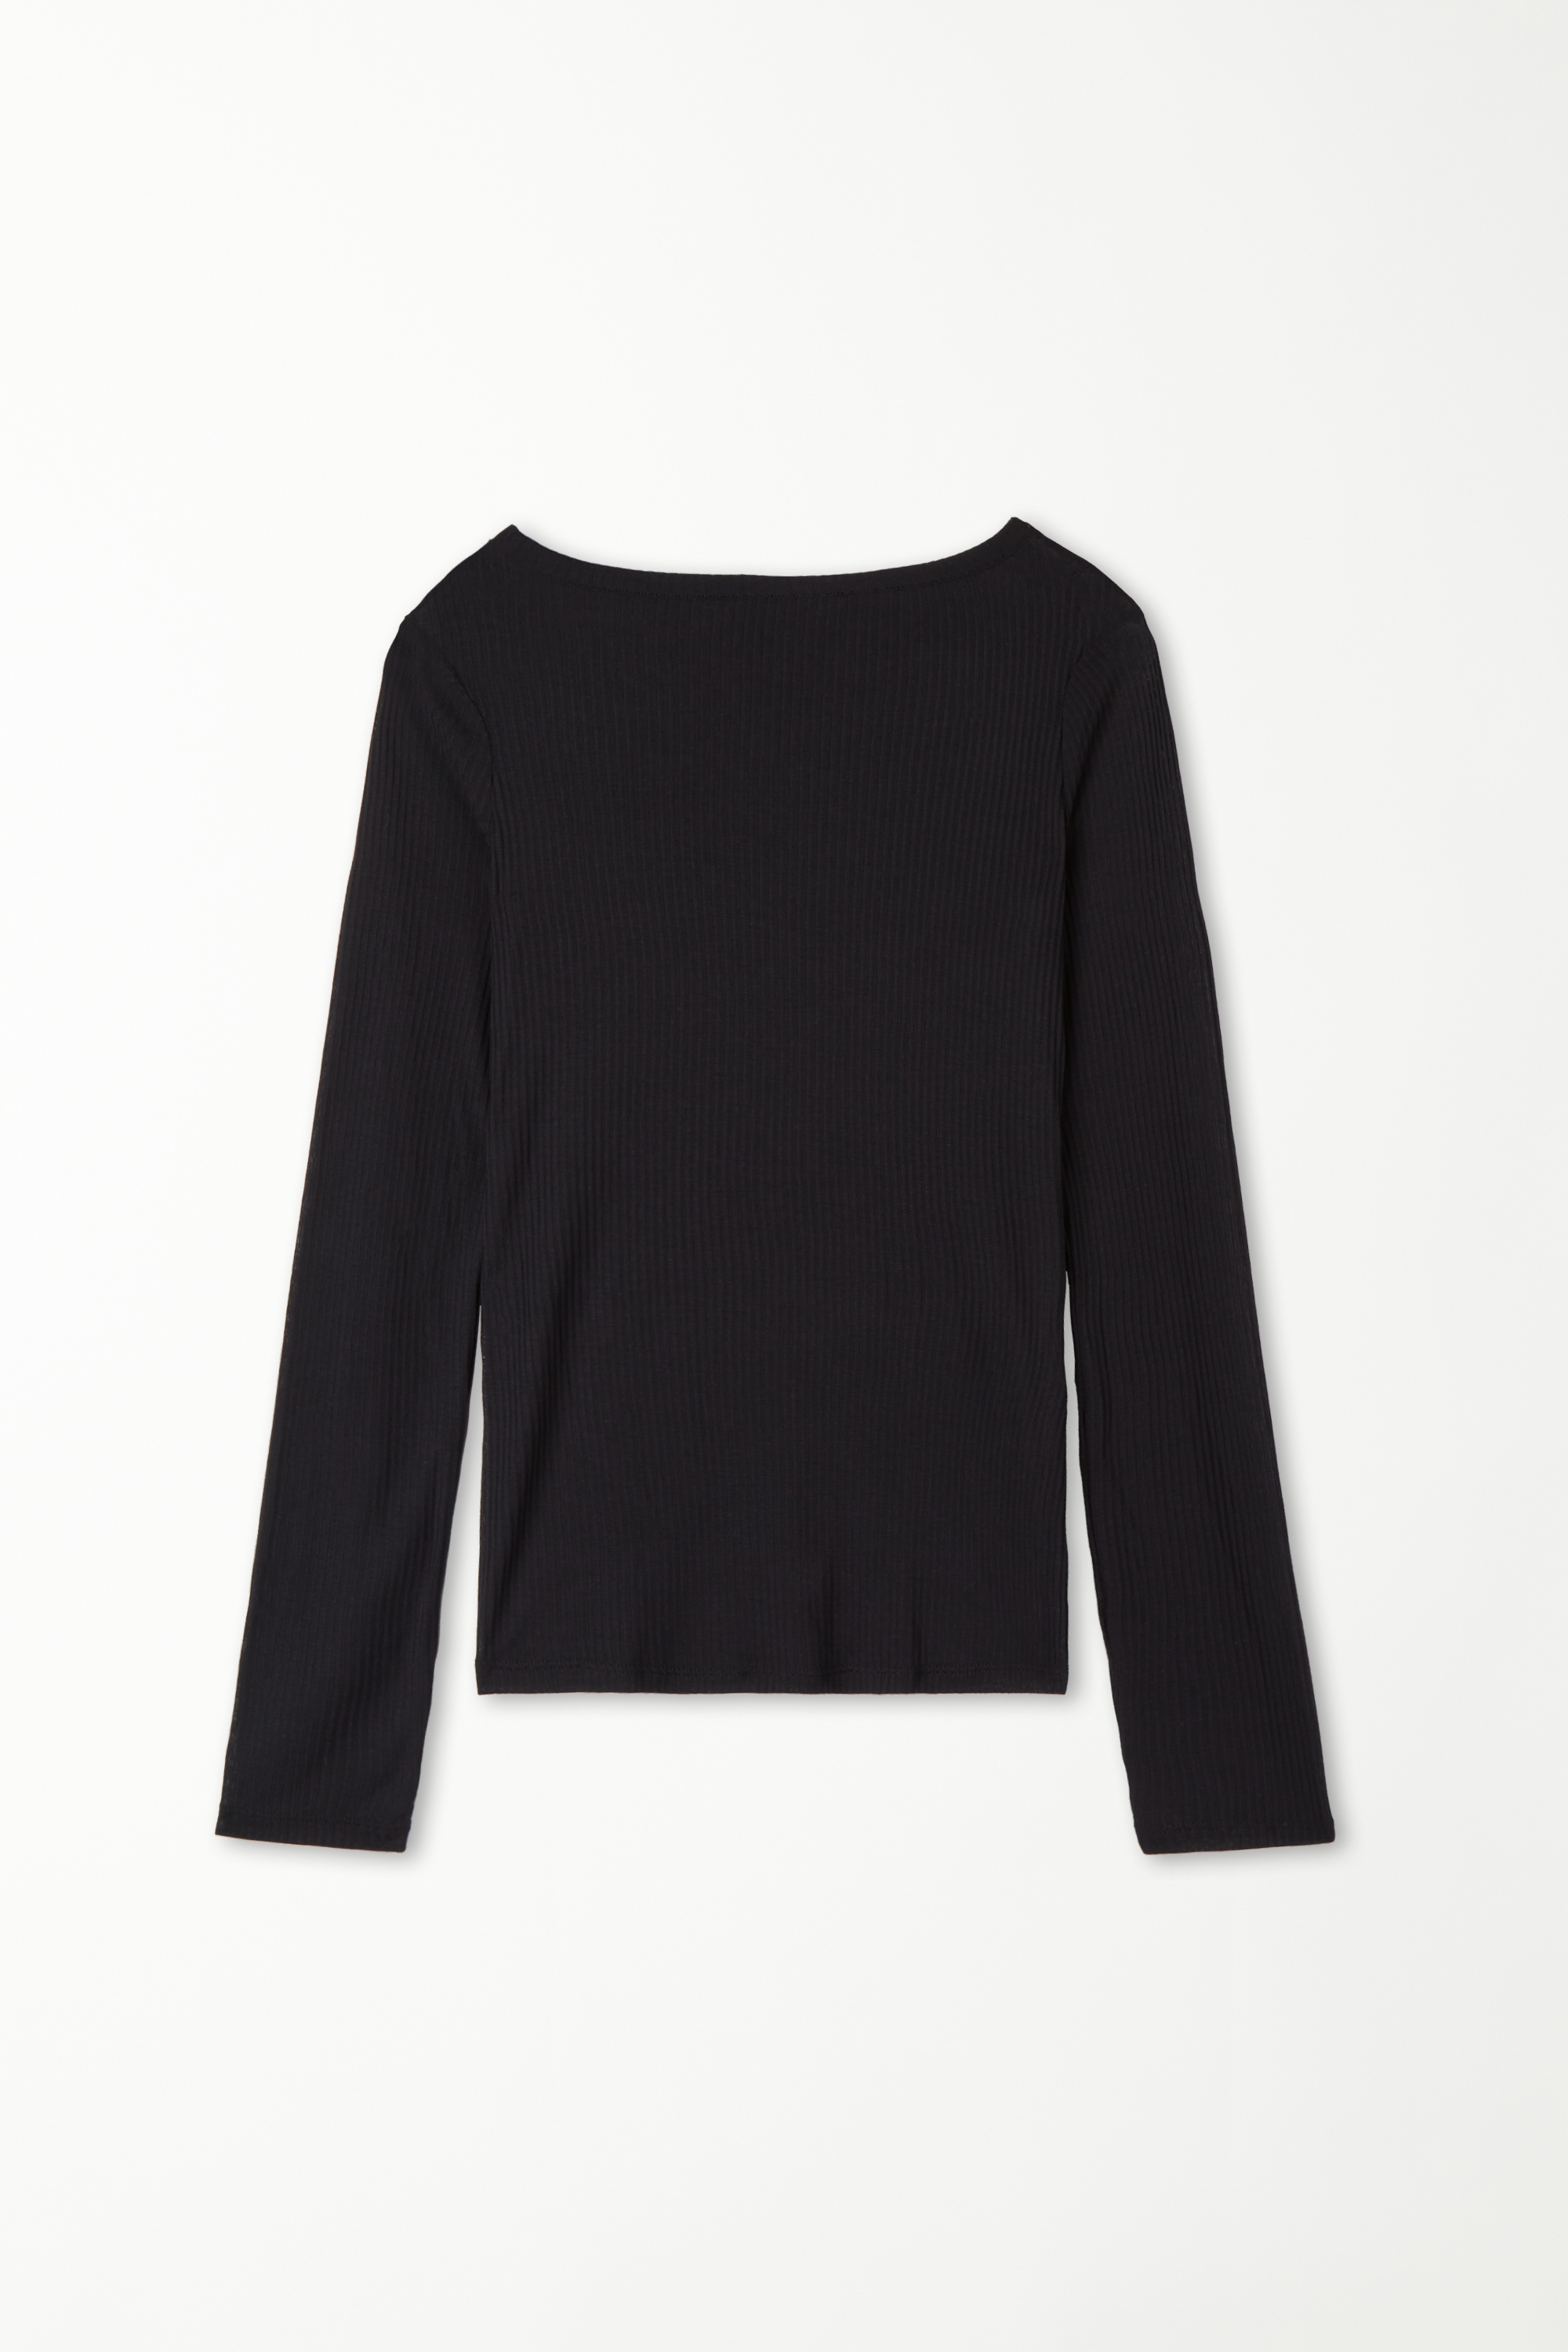 Ultralight Ribbed Viscose Top with Boat Neck and Long Sleeves